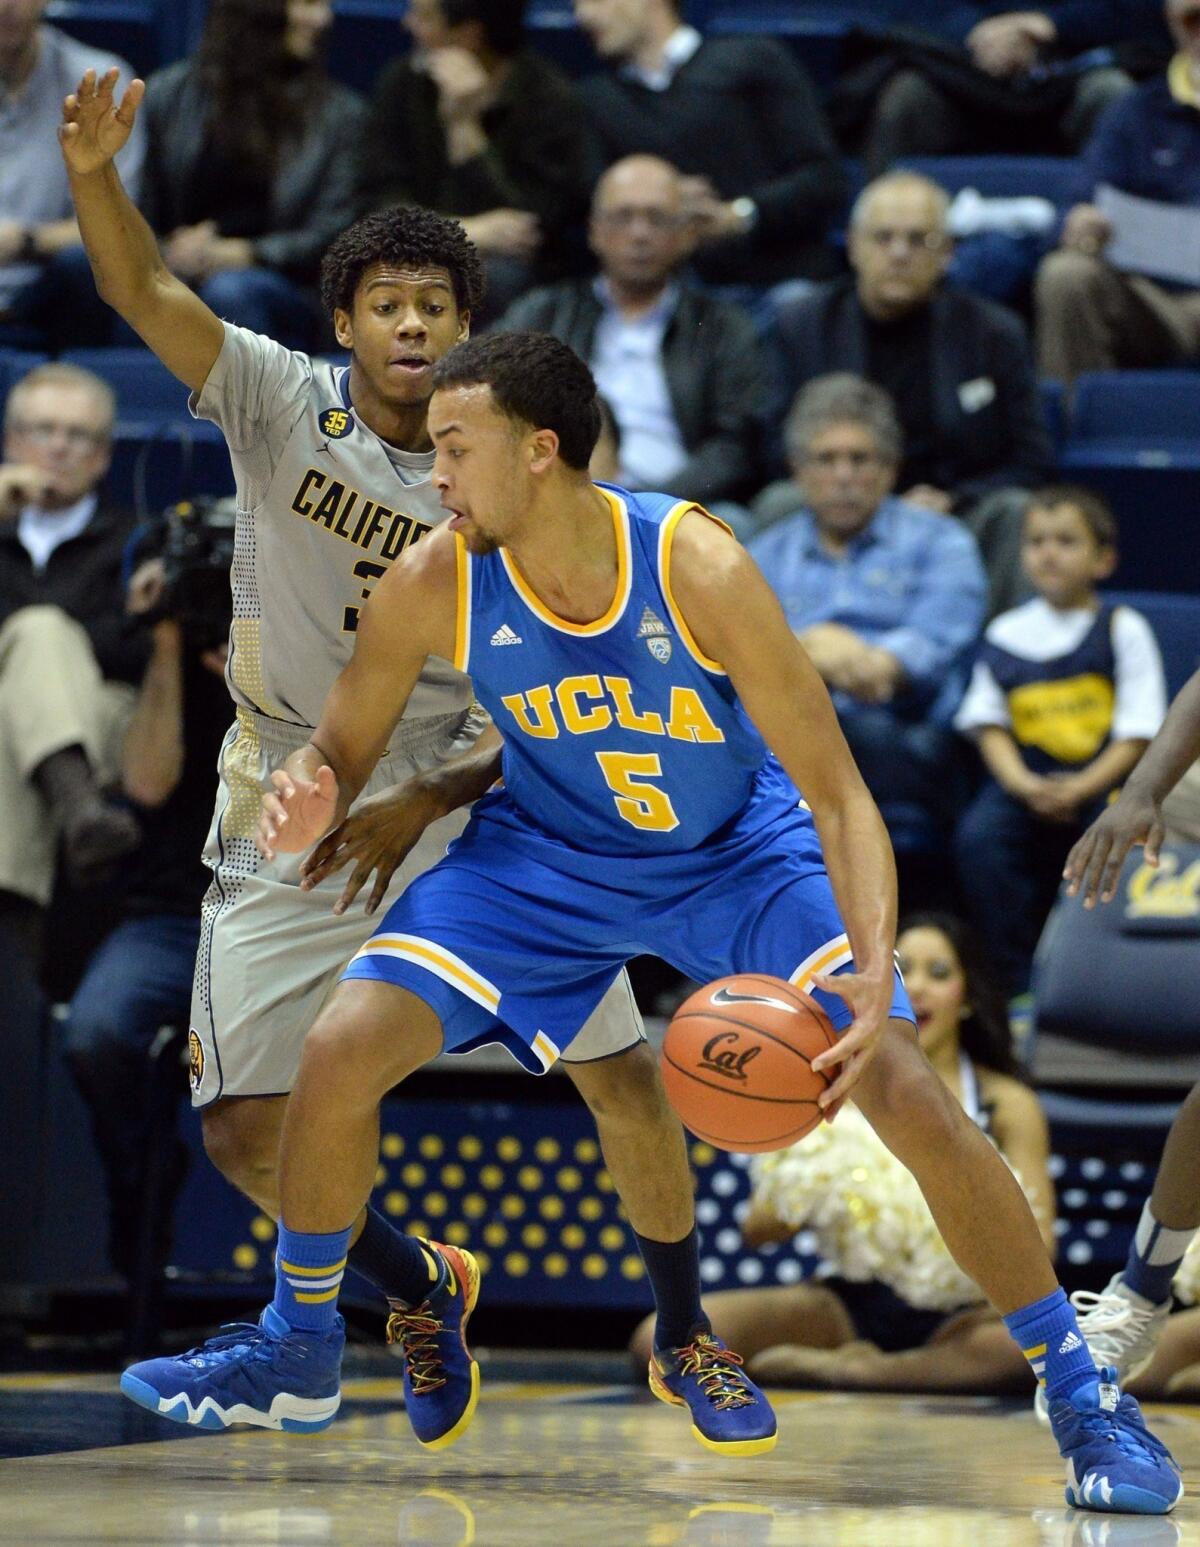 UCLA's Kyle Anderson is defended by California's Tyrone Wallace during the first half of the Bruins' 86-66 win Wednesday over the Golden Bears at Haas Pavilion in Berkeley, Calif.